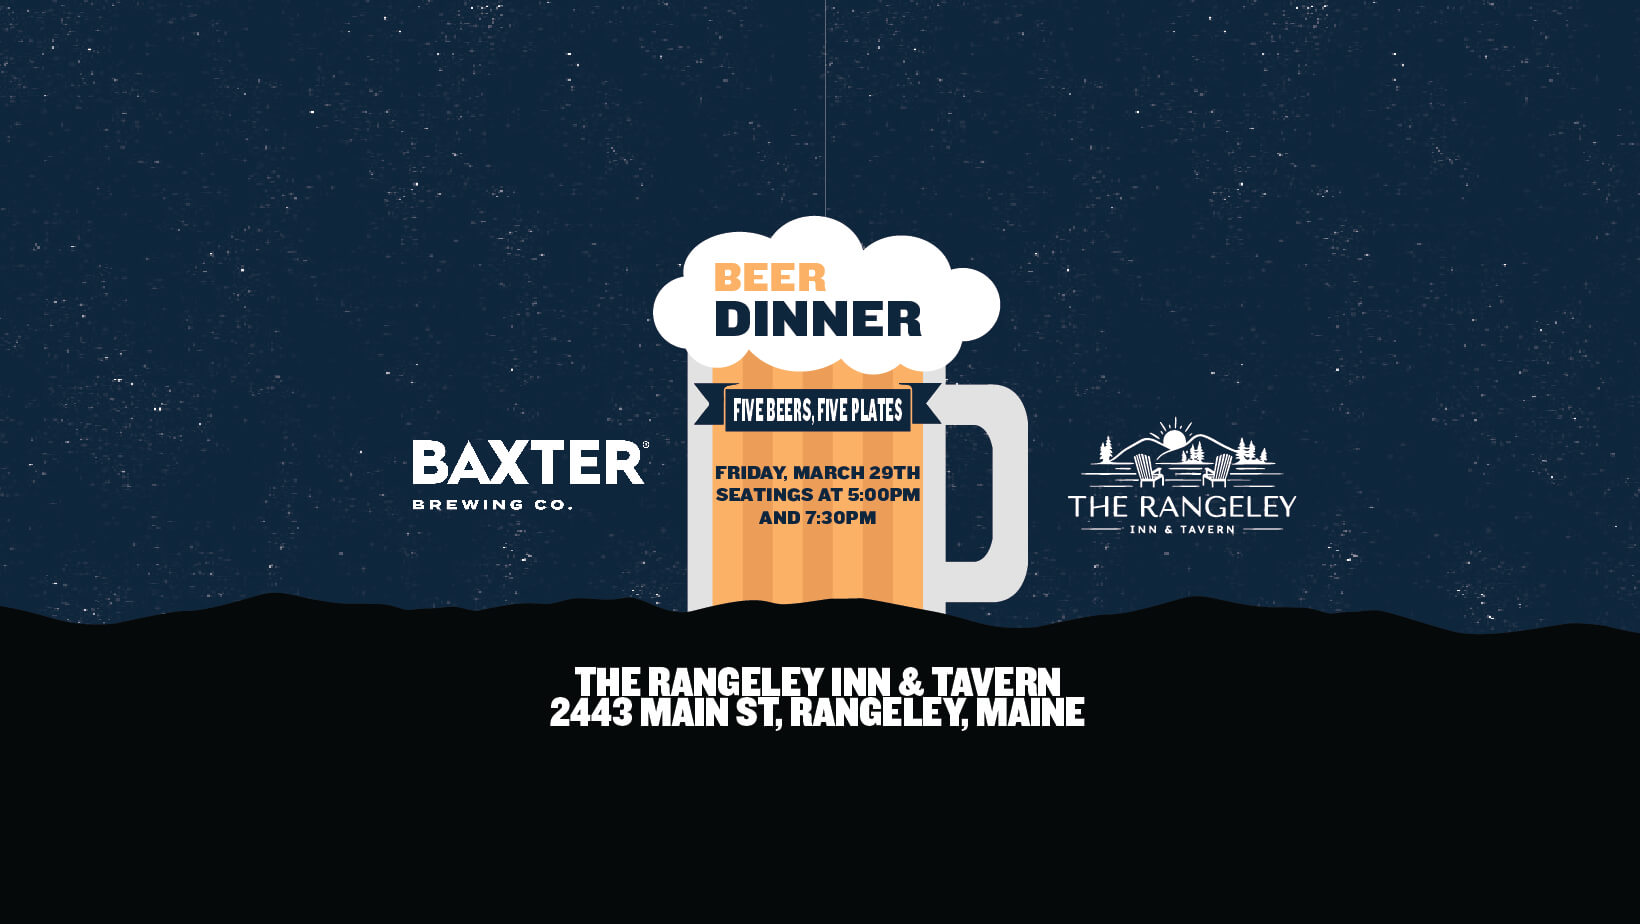 Image promoting a beer dinner at the Rangeley inn on March 29th.